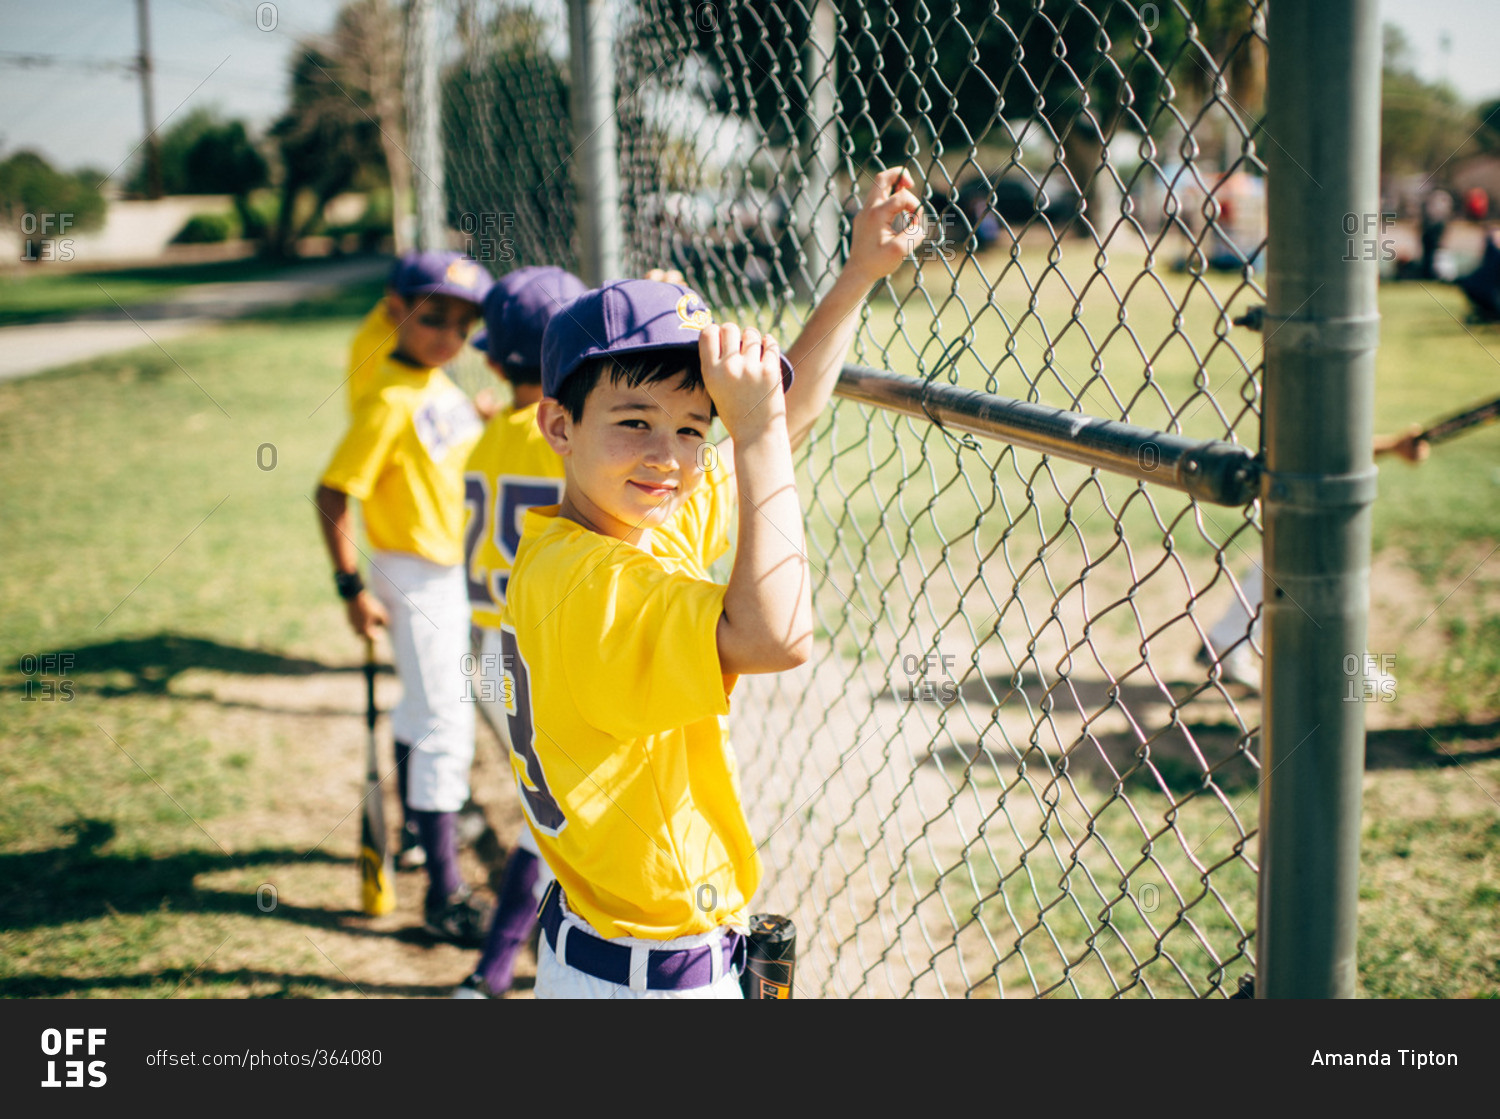 Boys on a baseball team standing by a fence